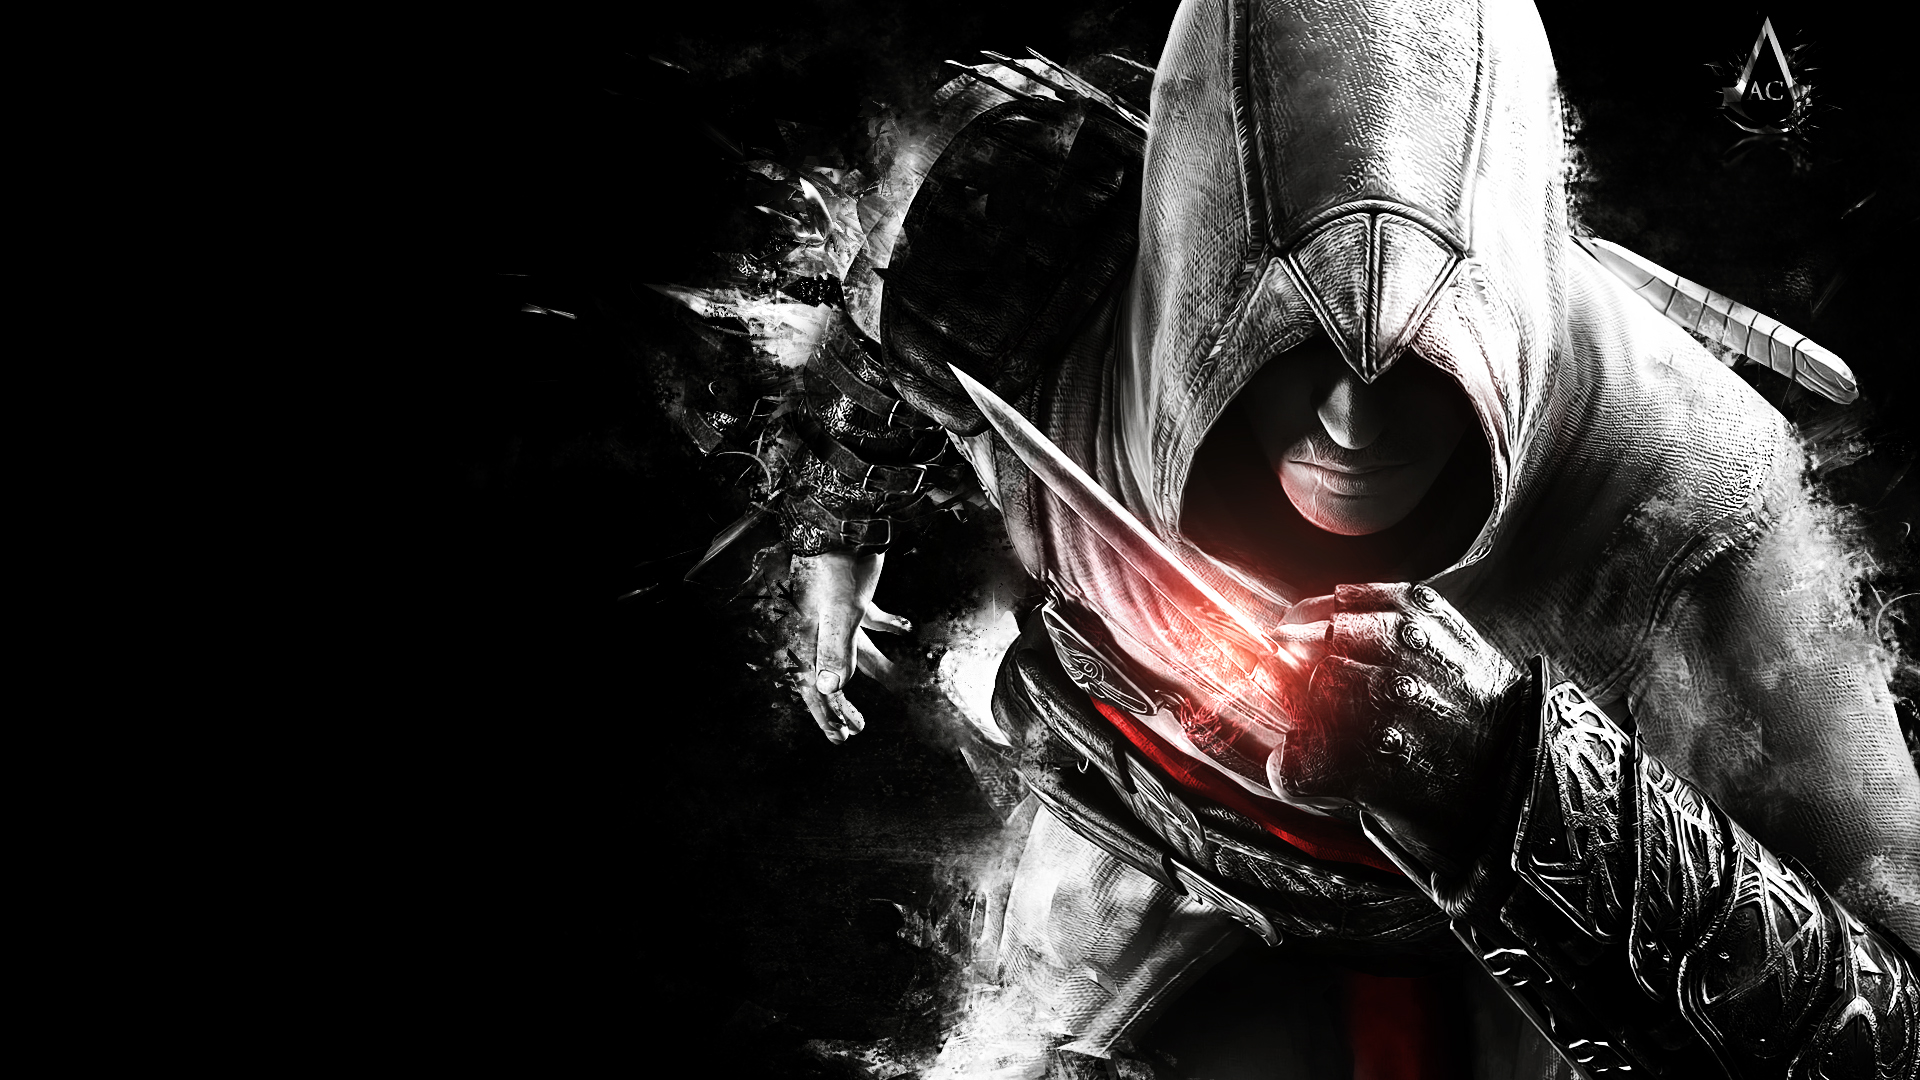 Assassins Creed Wallpaper Full HD Wip By Rykouy